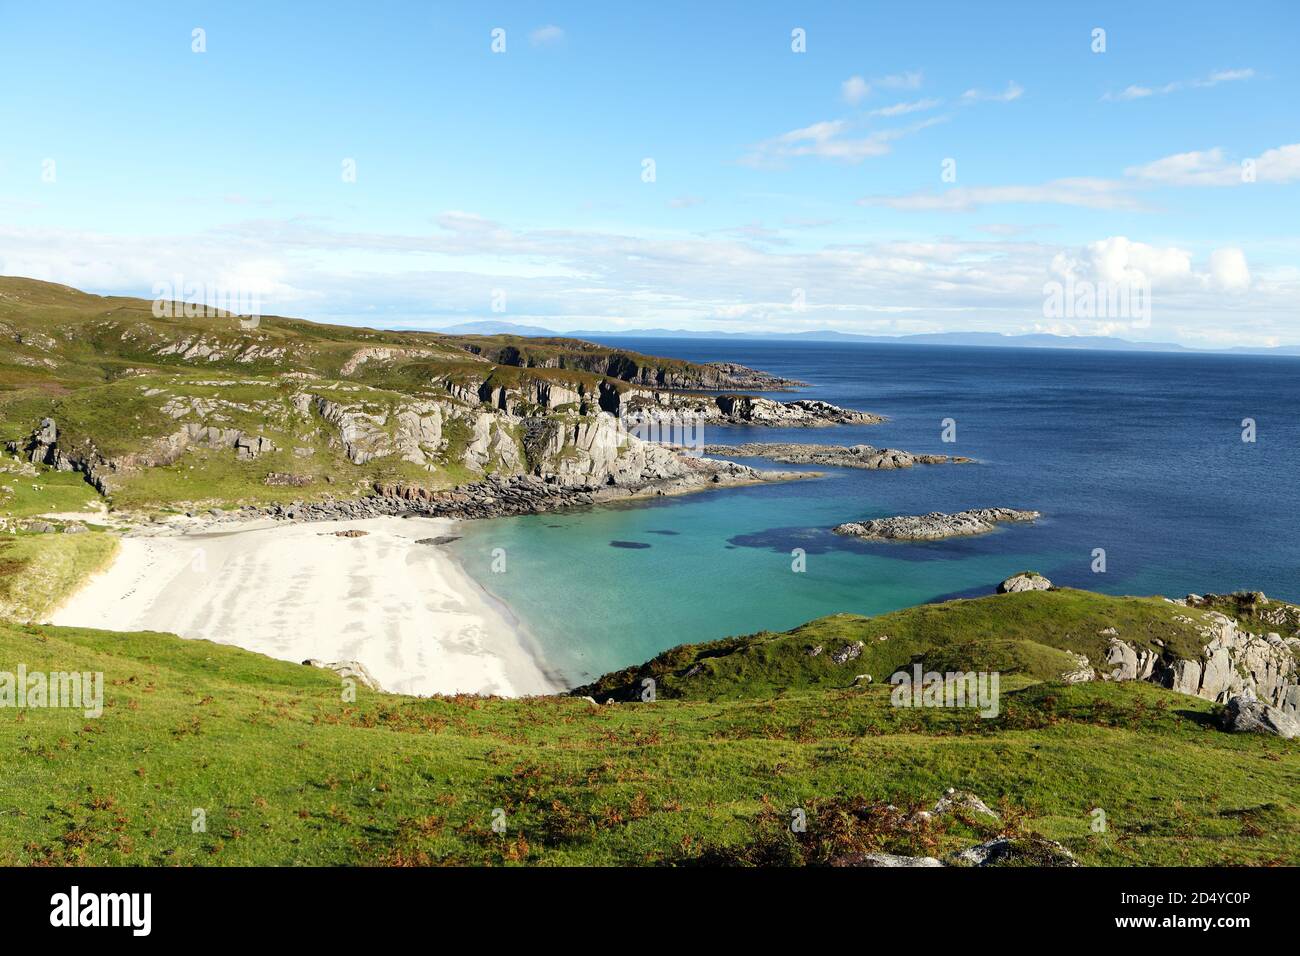 Beautiful secluded sandy beach on the Isle of Mull in the Inner Hebrides of Scotland, UK Stock Photo